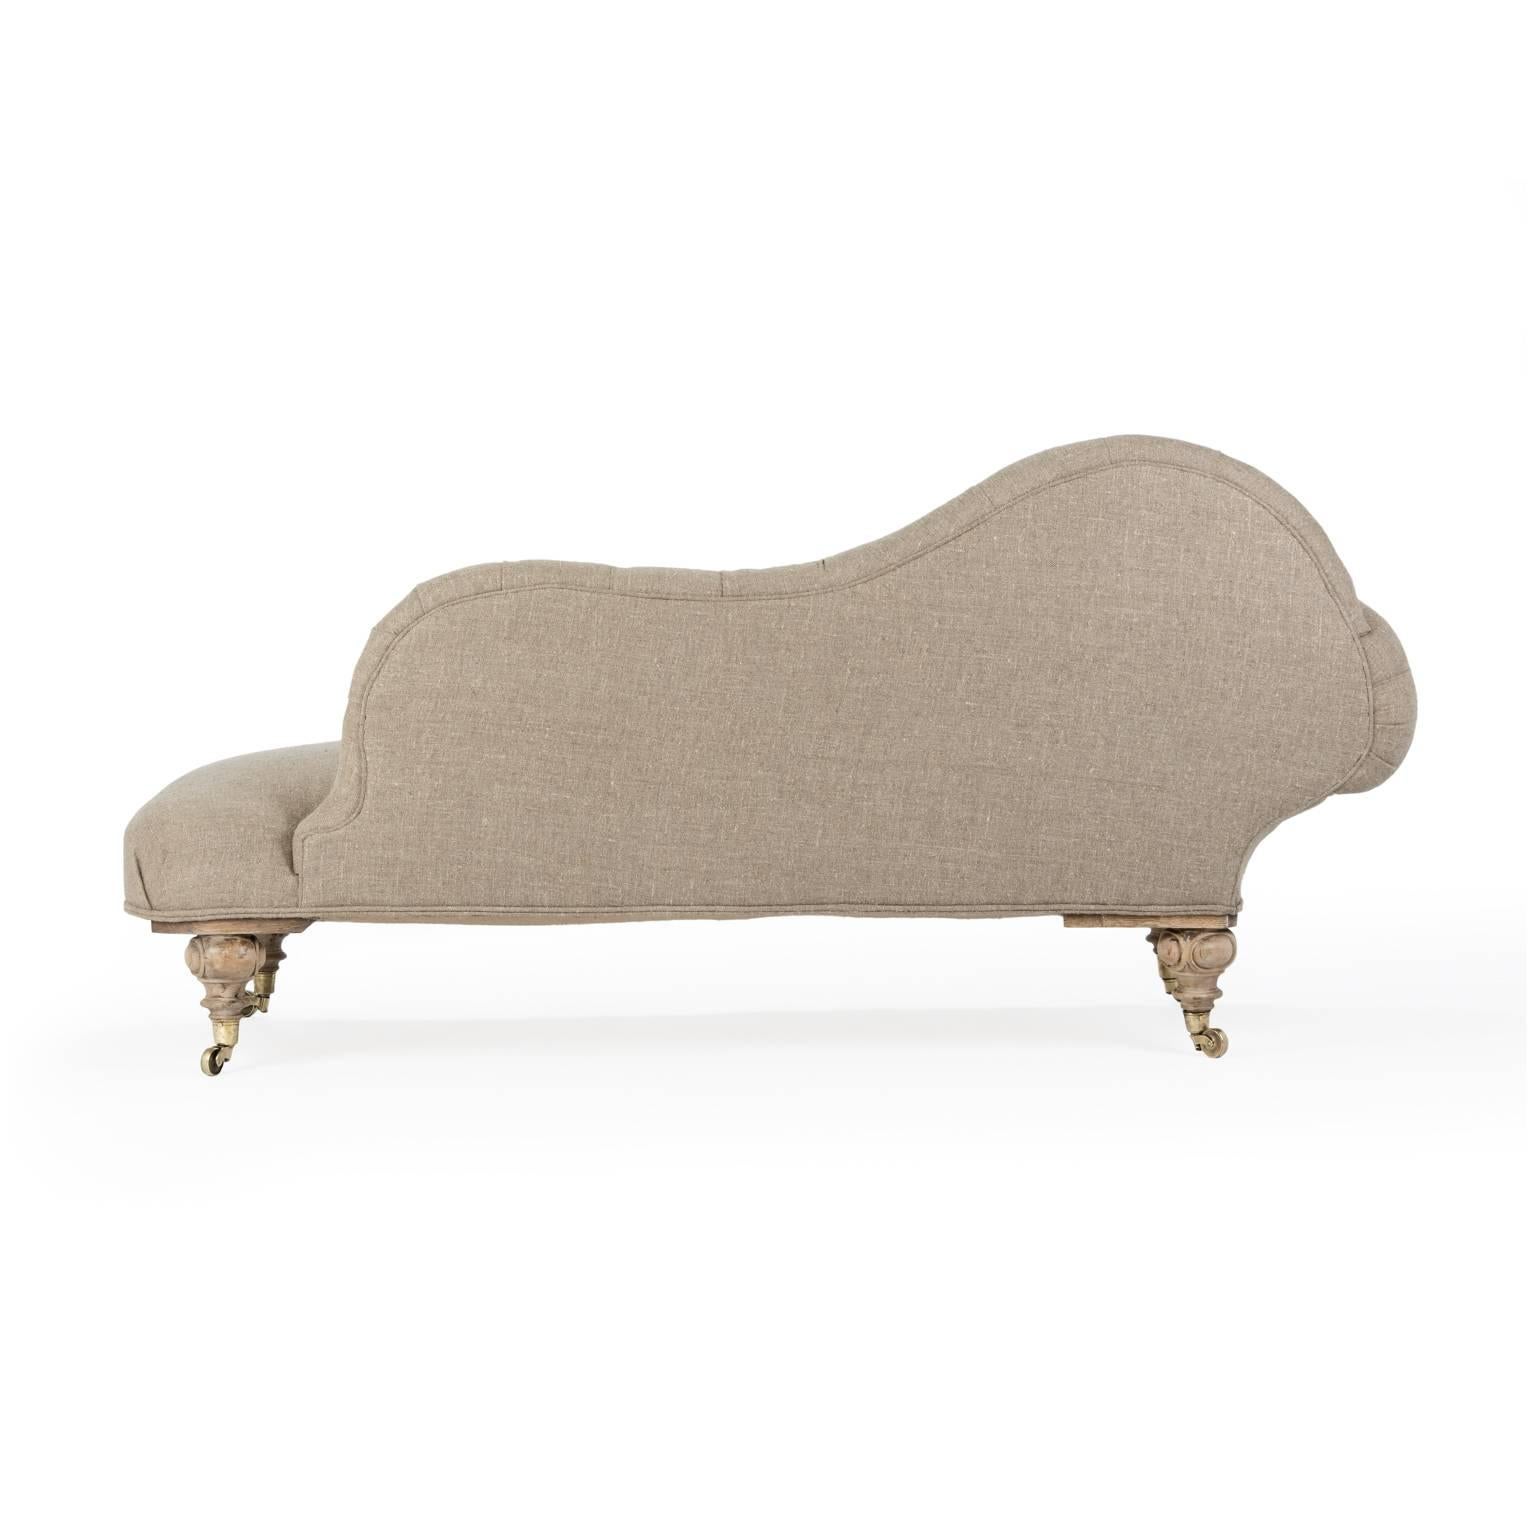 Eclectic Late Victorian Scroll Arm Tufted Chaise Longue in Organic Flax Linen. For Sale 1